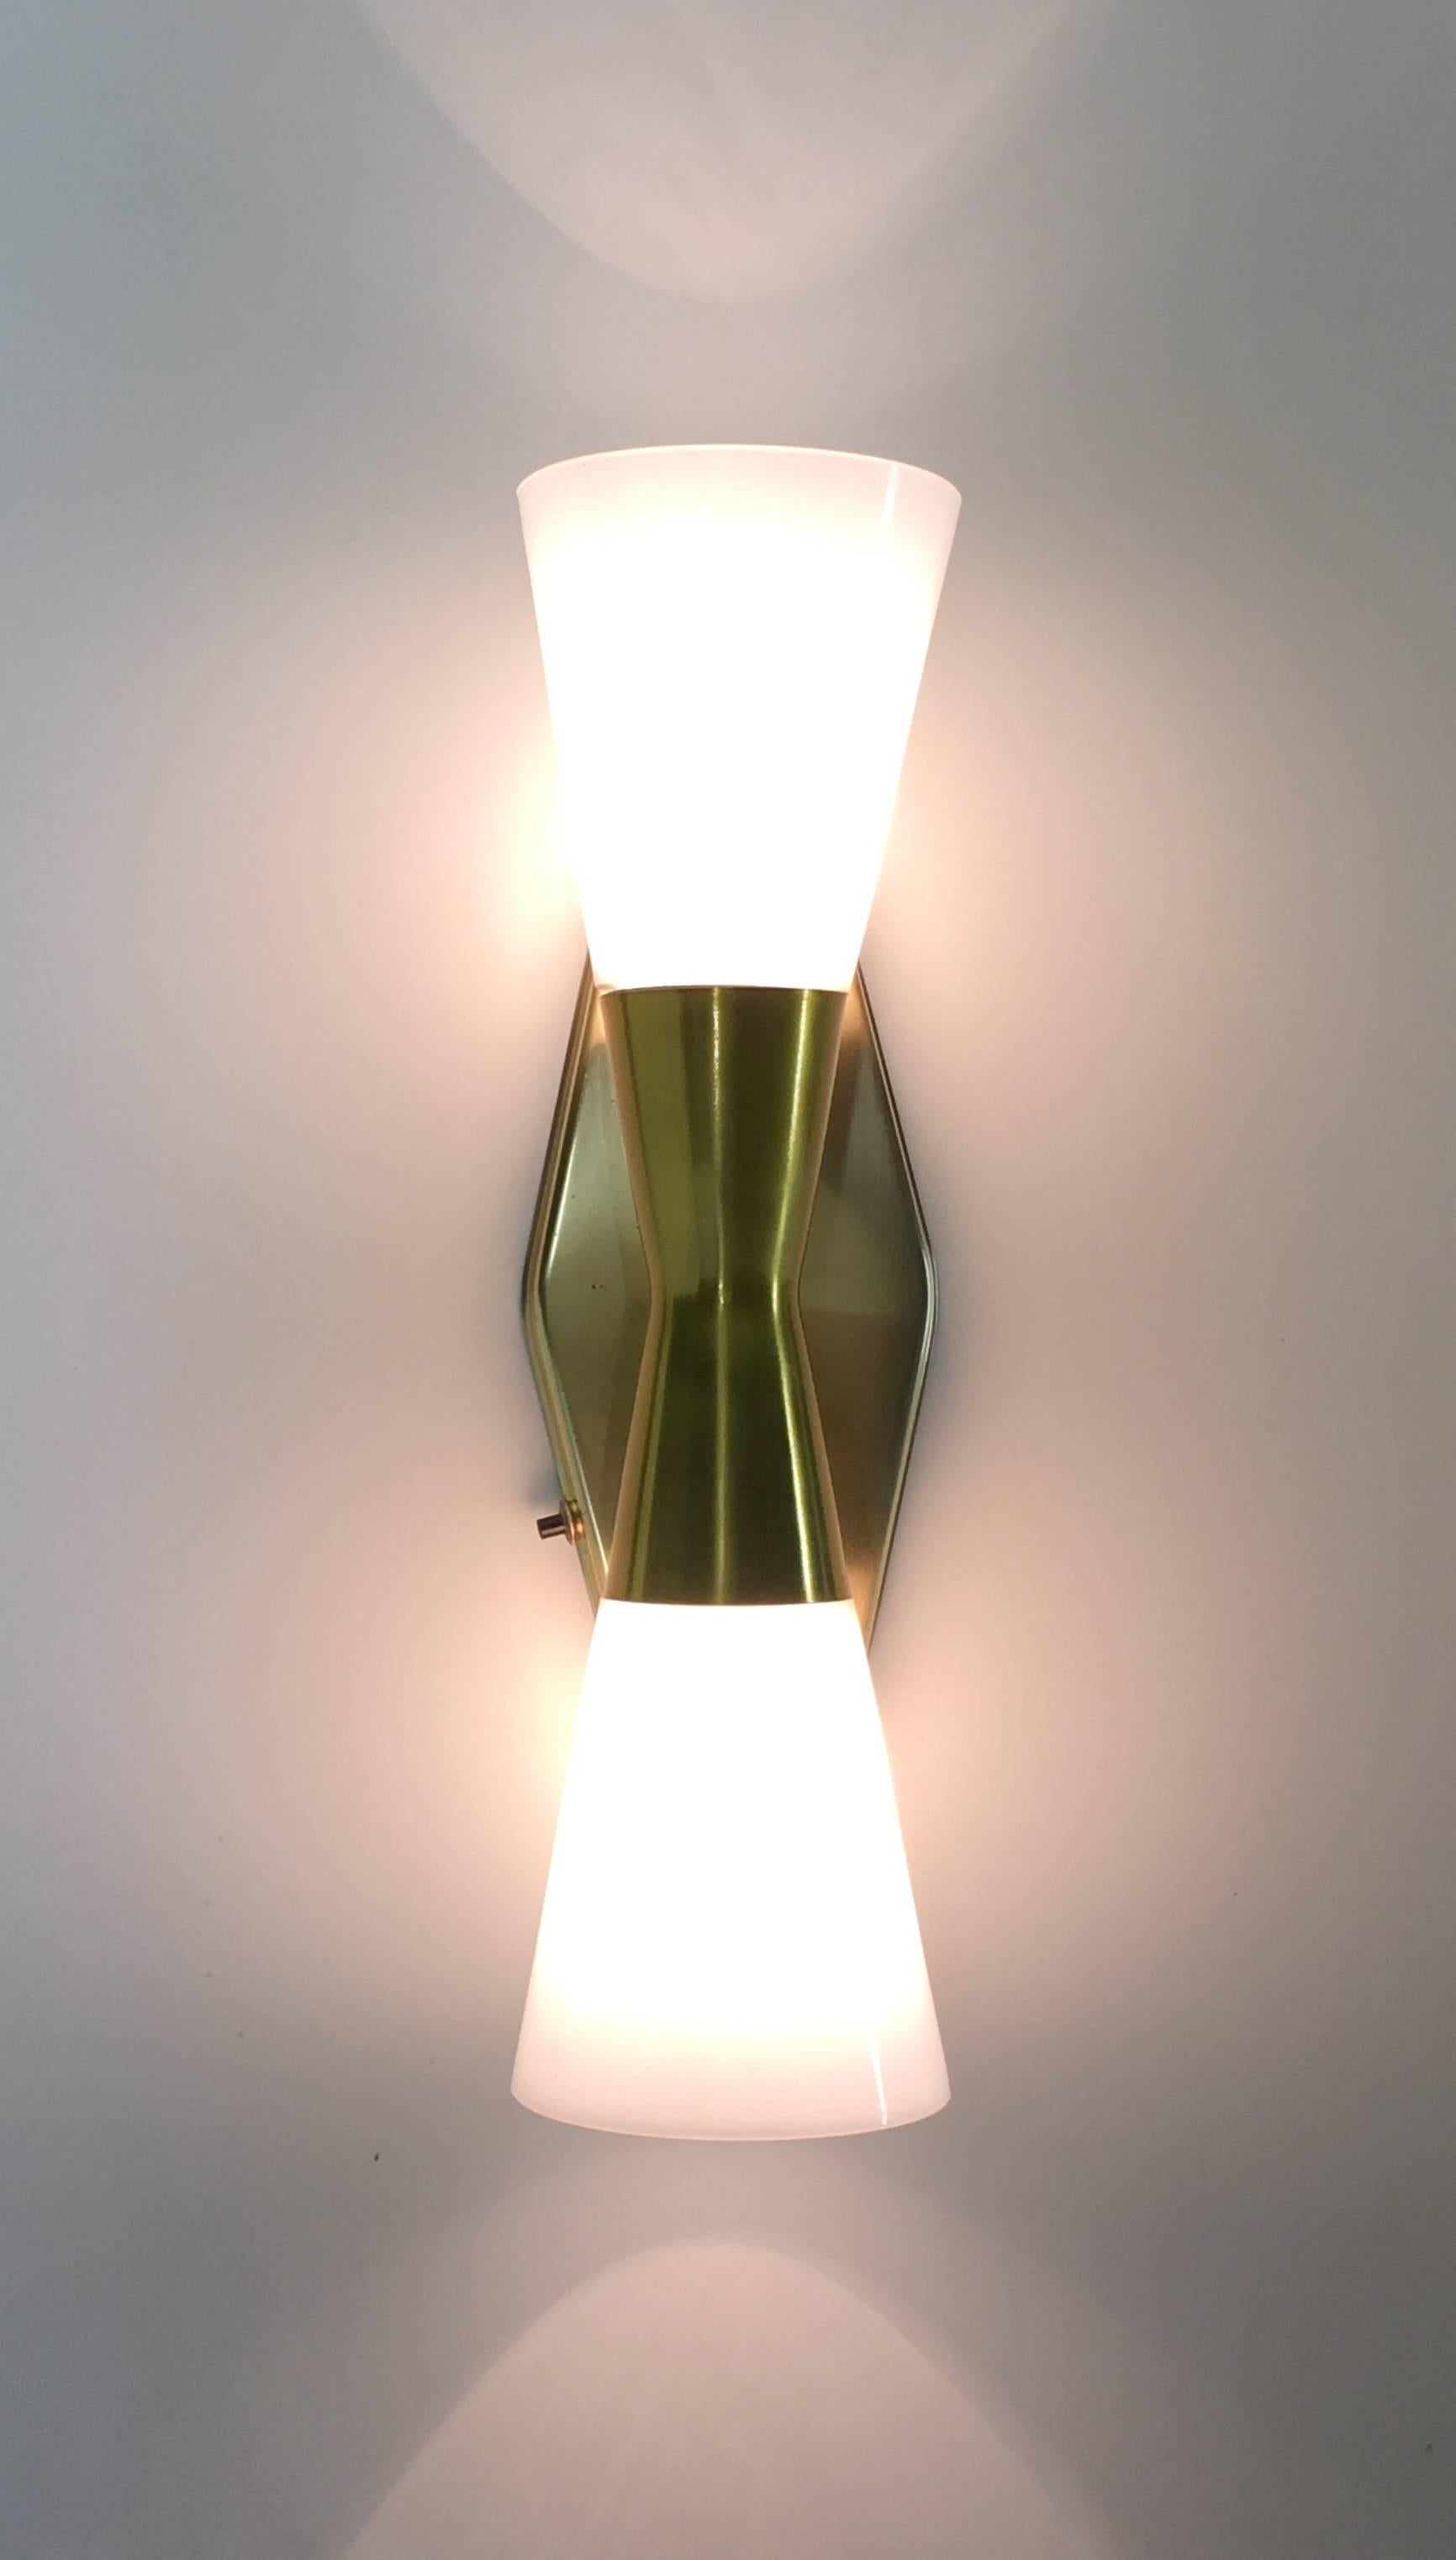 John Virden,
Virden Lighting
Circa 1950, USA
Pair of Sconces 
16.5 tall 6.25 inch wide

The bow tie sconce model V-6446 lamp produced by John C. Virden Lighting in the 1950's became iconic and has been reinvented many times, though none capture the